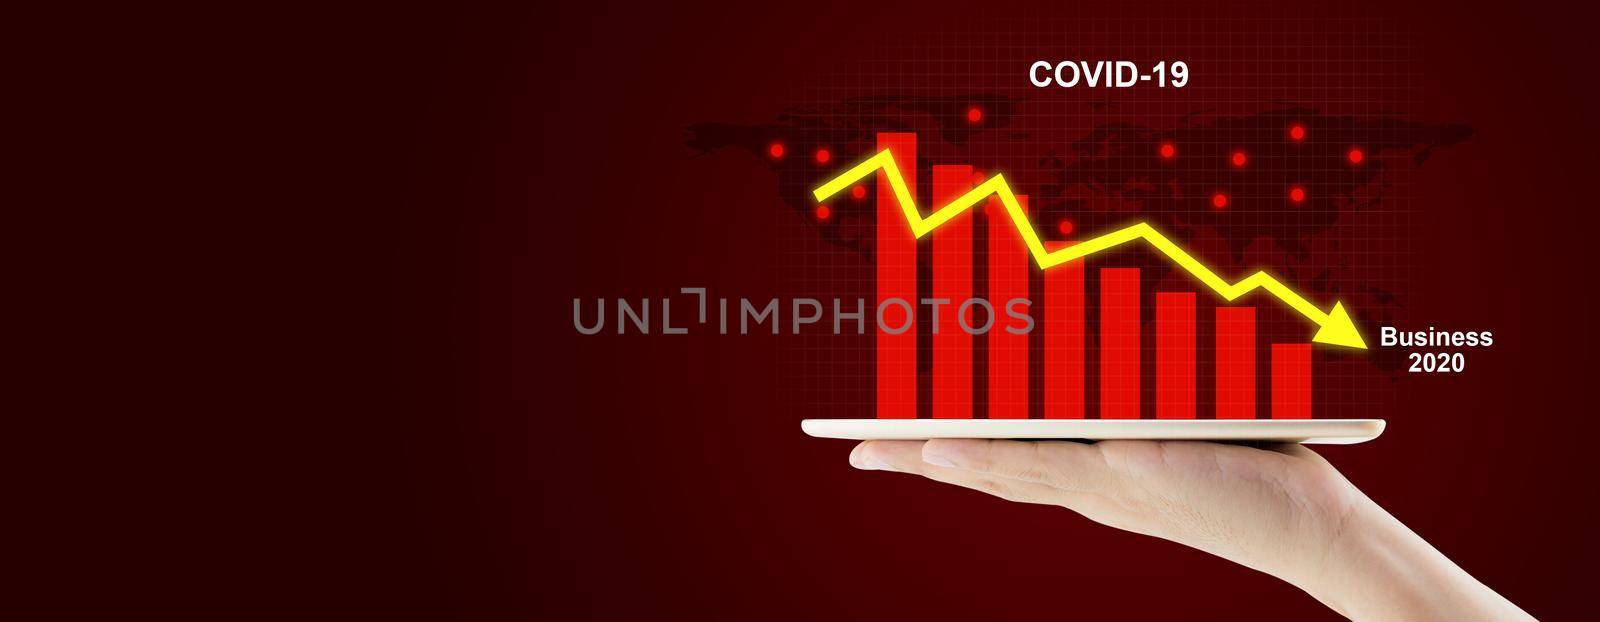 Recession of economic global, economy crisis from impact covid-19, business and financial, finance and analysis stock from pandemic of coronavirus, graph and chart, banner website. by nnudoo